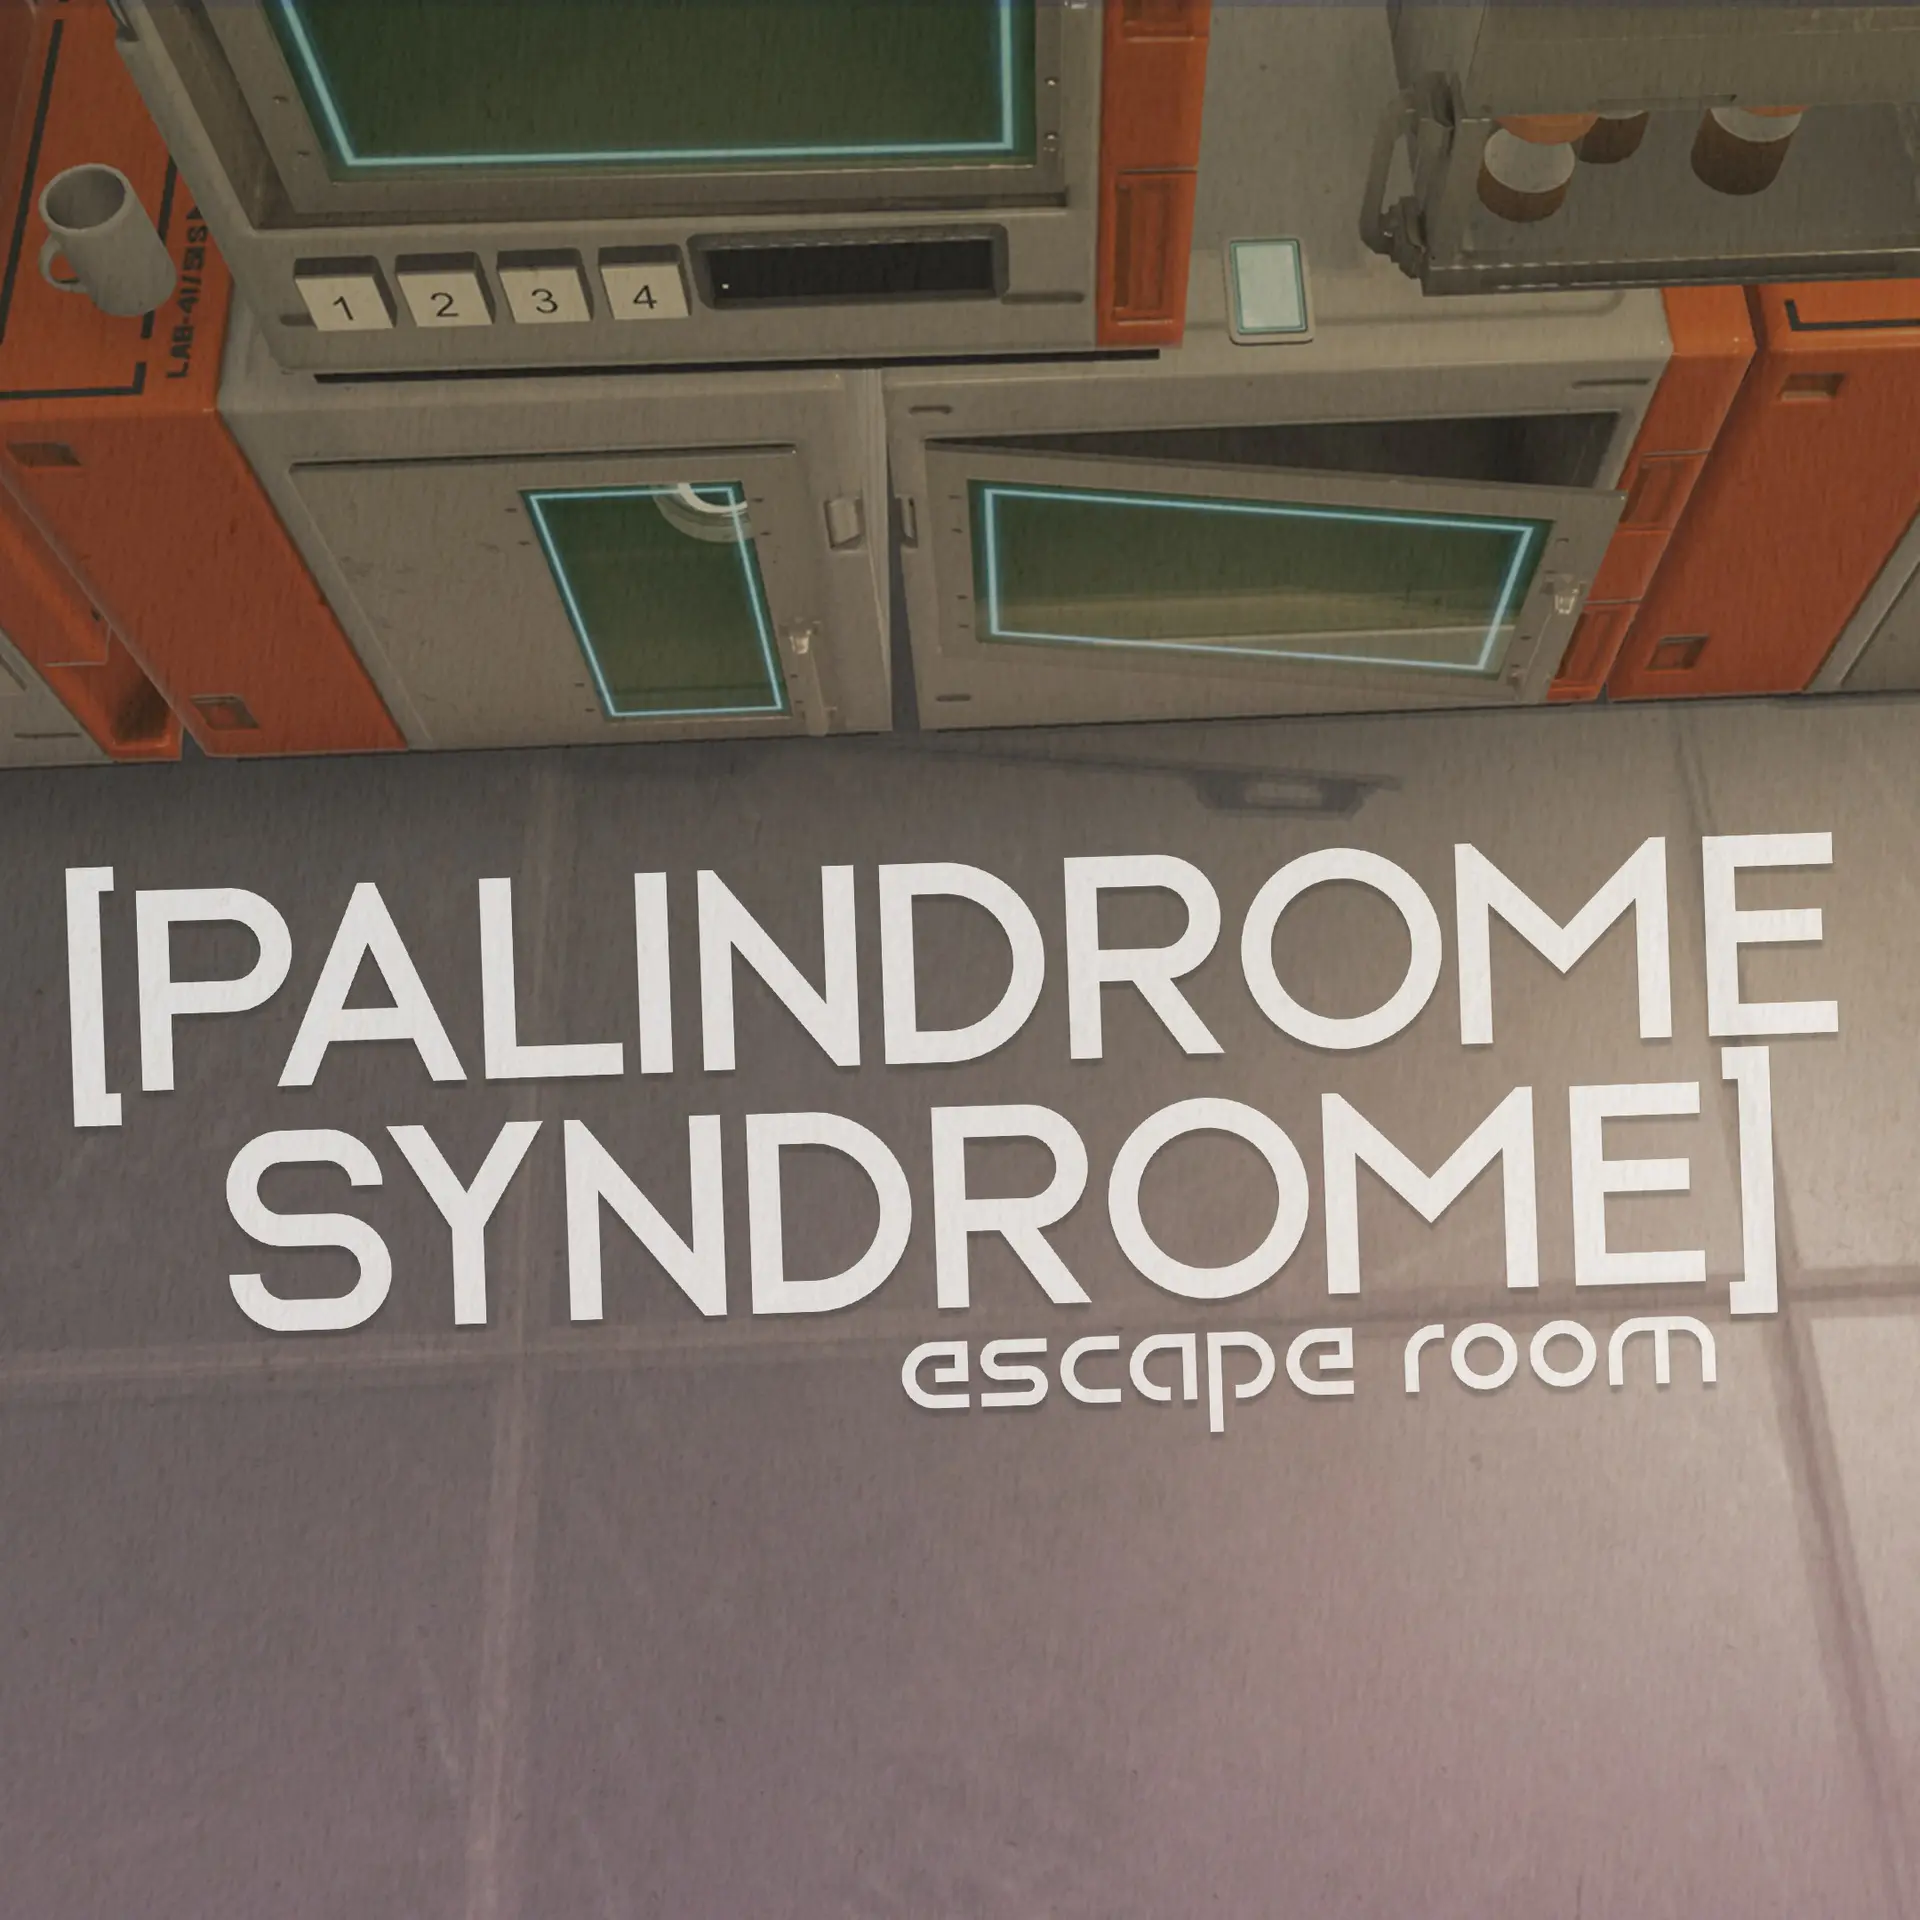 Palindrome Syndrome: Escape Room (Xbox Games US)